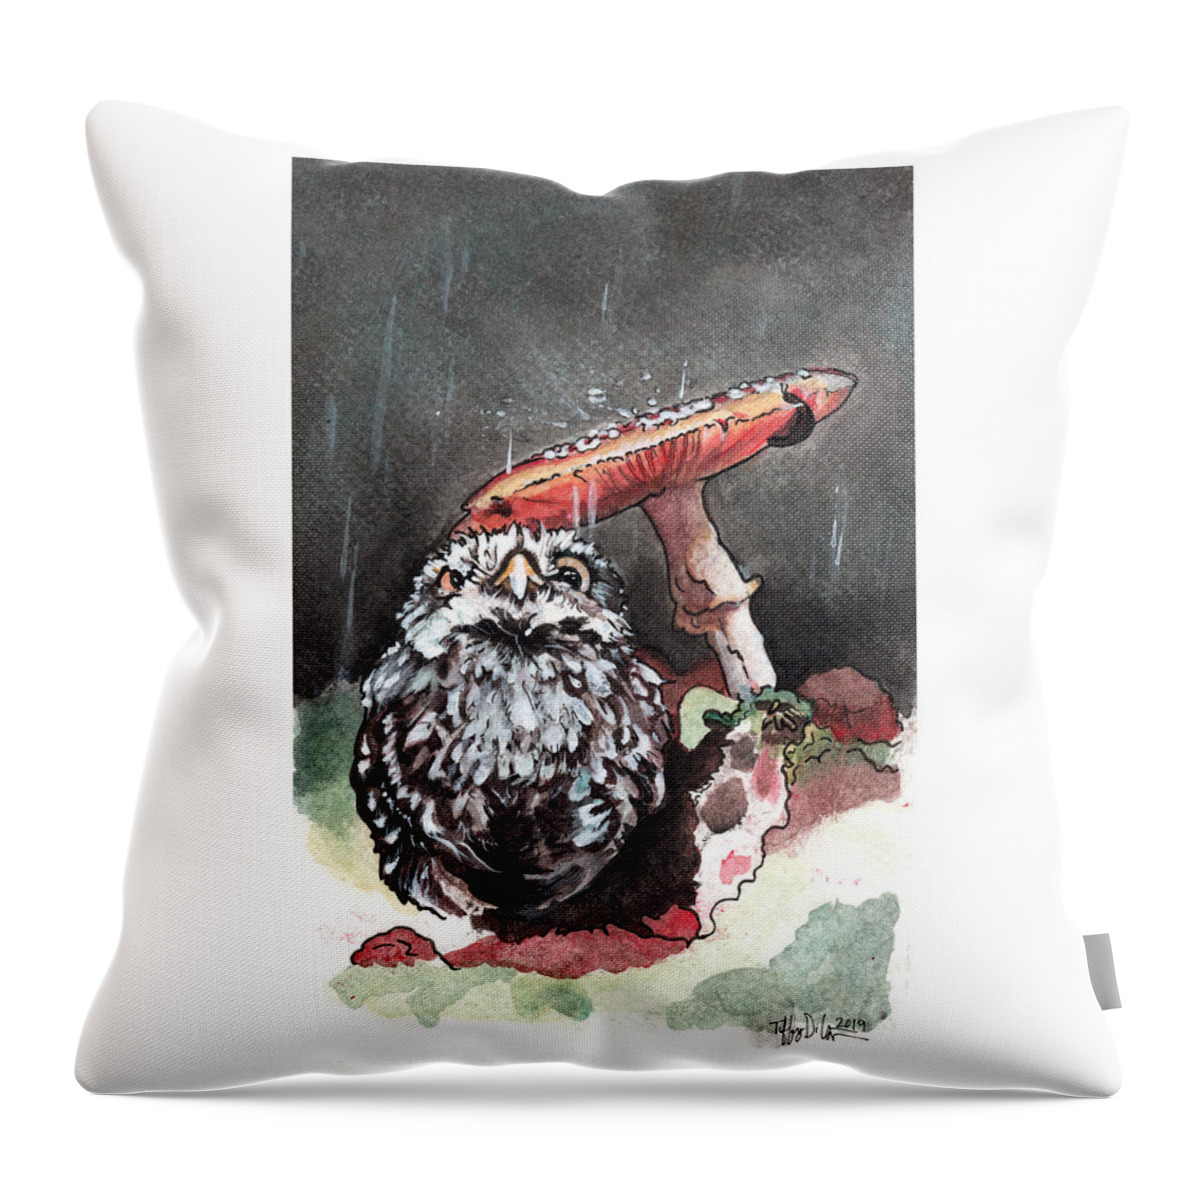 Bird Throw Pillow featuring the painting Grumpy Owl by Tiffany DiGiacomo